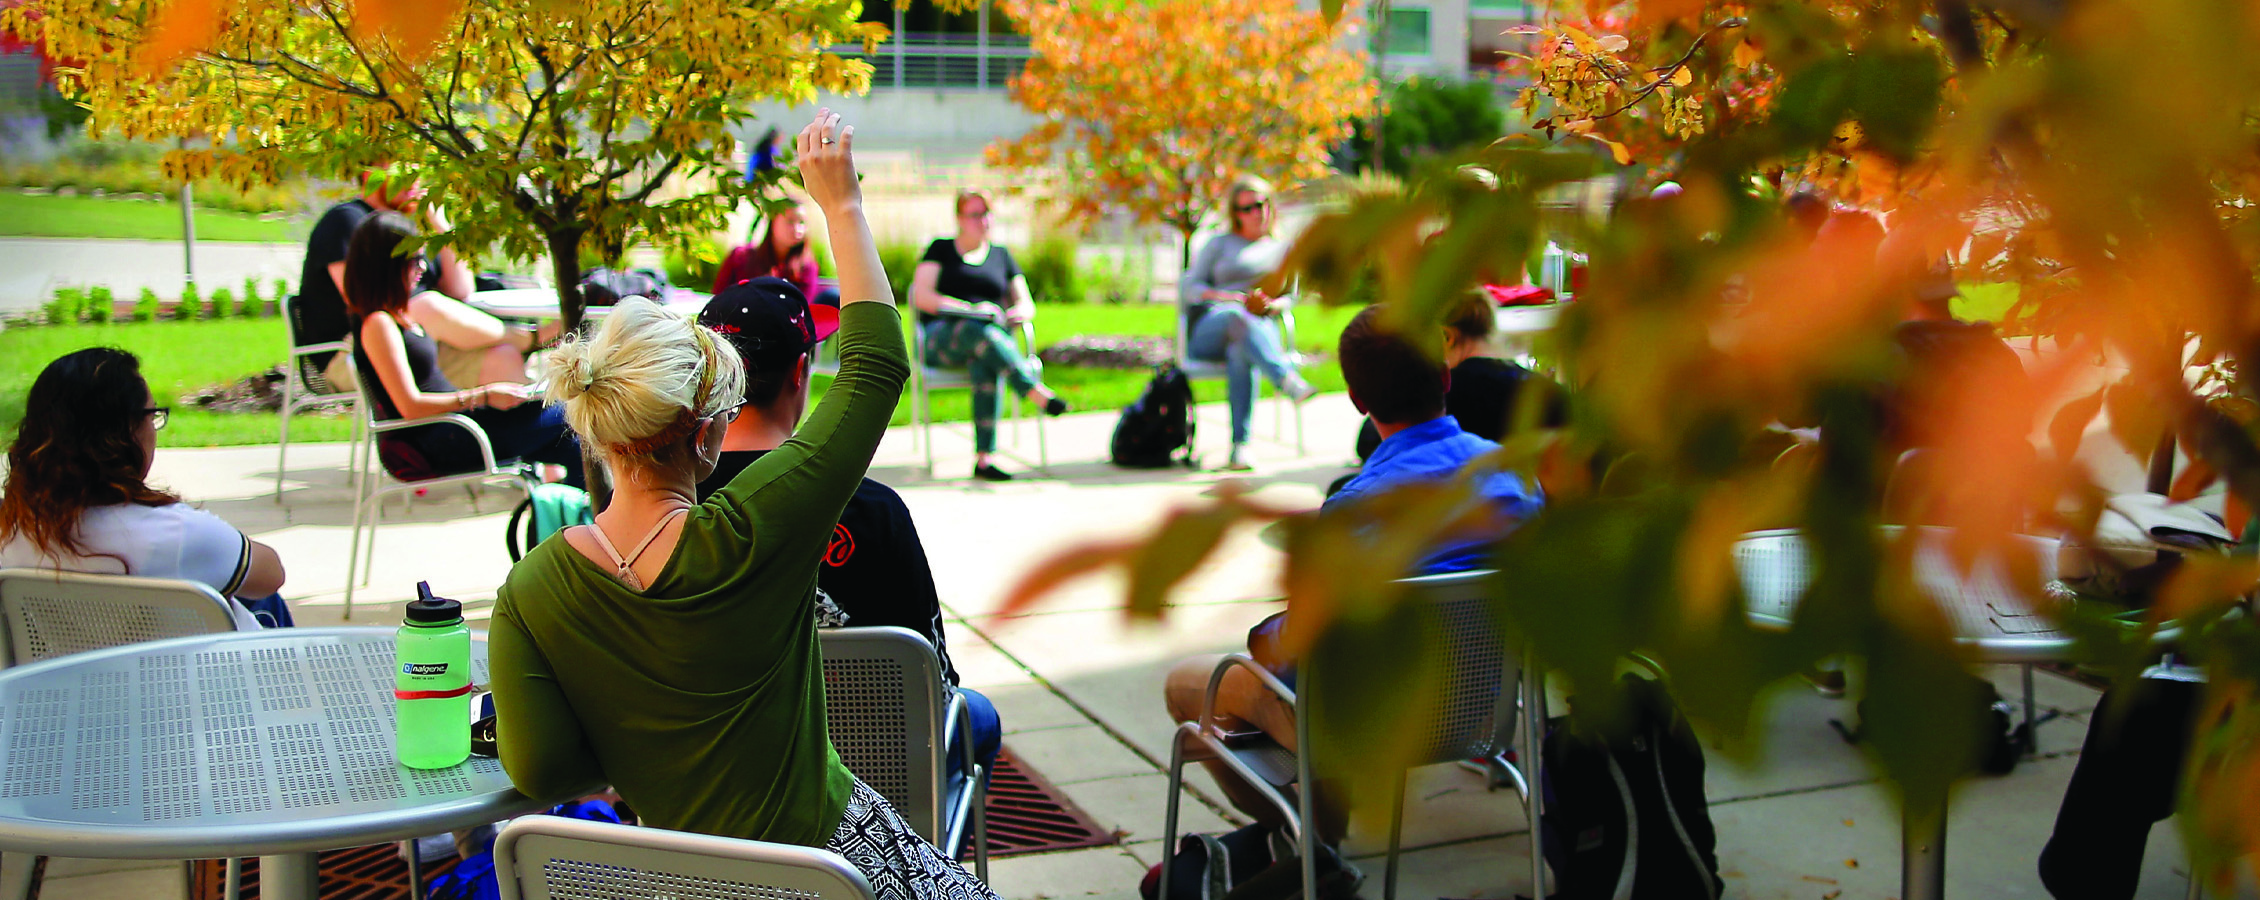 A class is held outside amidst fall leaves.